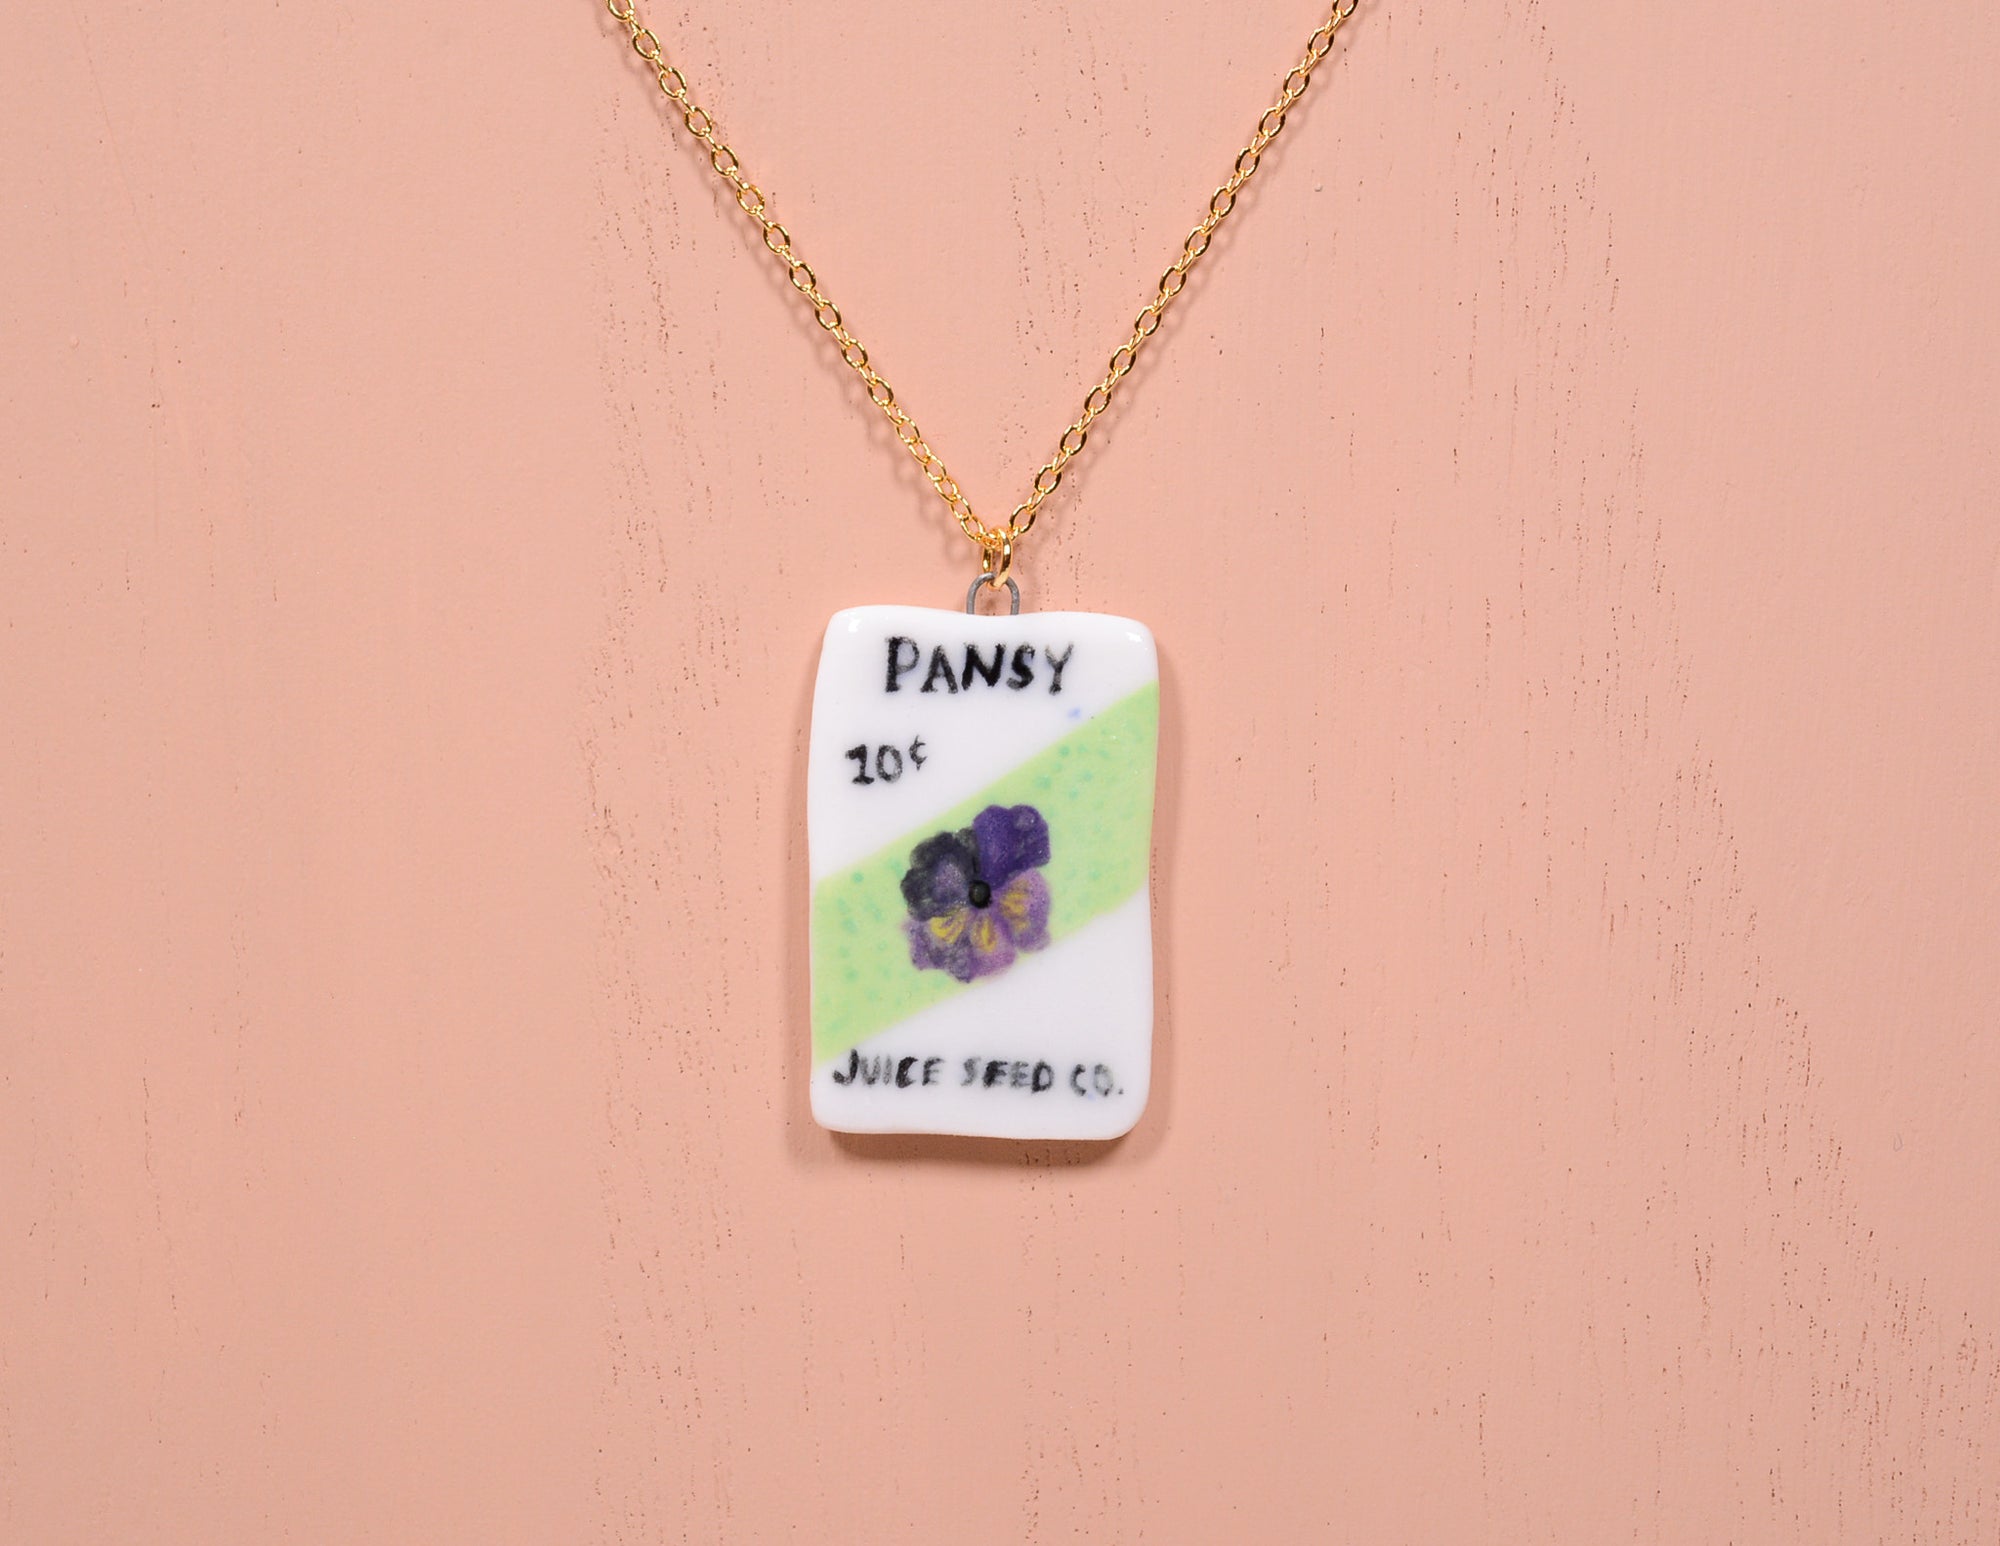 Pansy Seed Packet Necklace